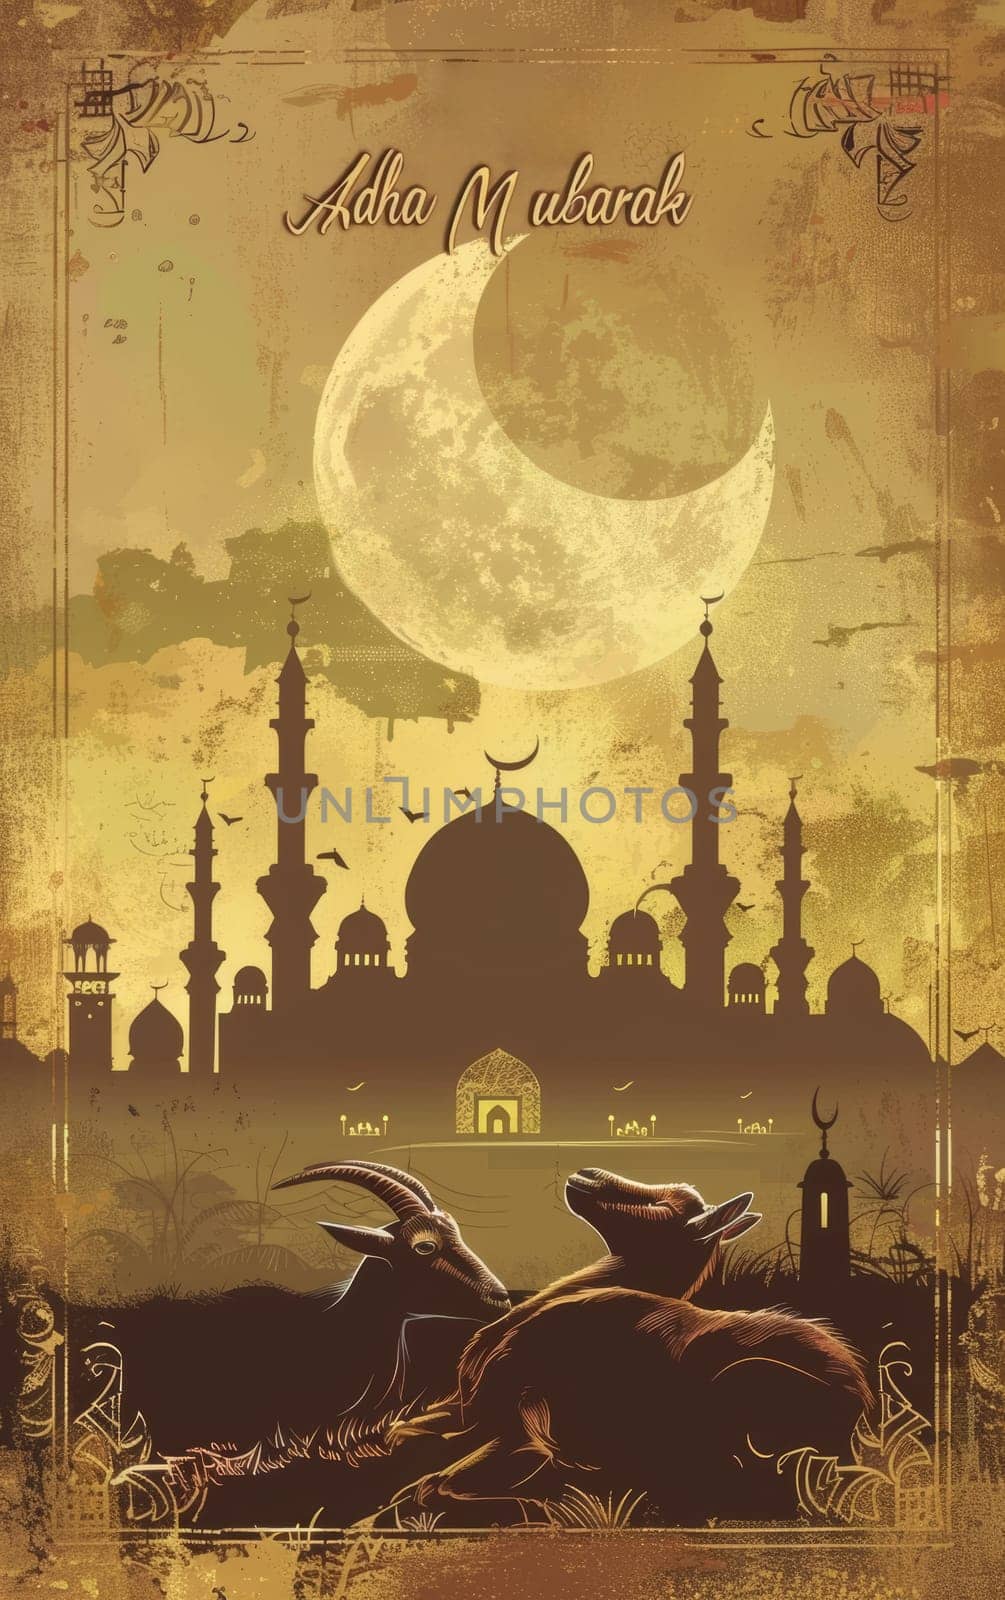 A rustic Eid al Adha Mubarak card with a vintage crescent moon, mosque skyline, and goats in a serene, old-world style